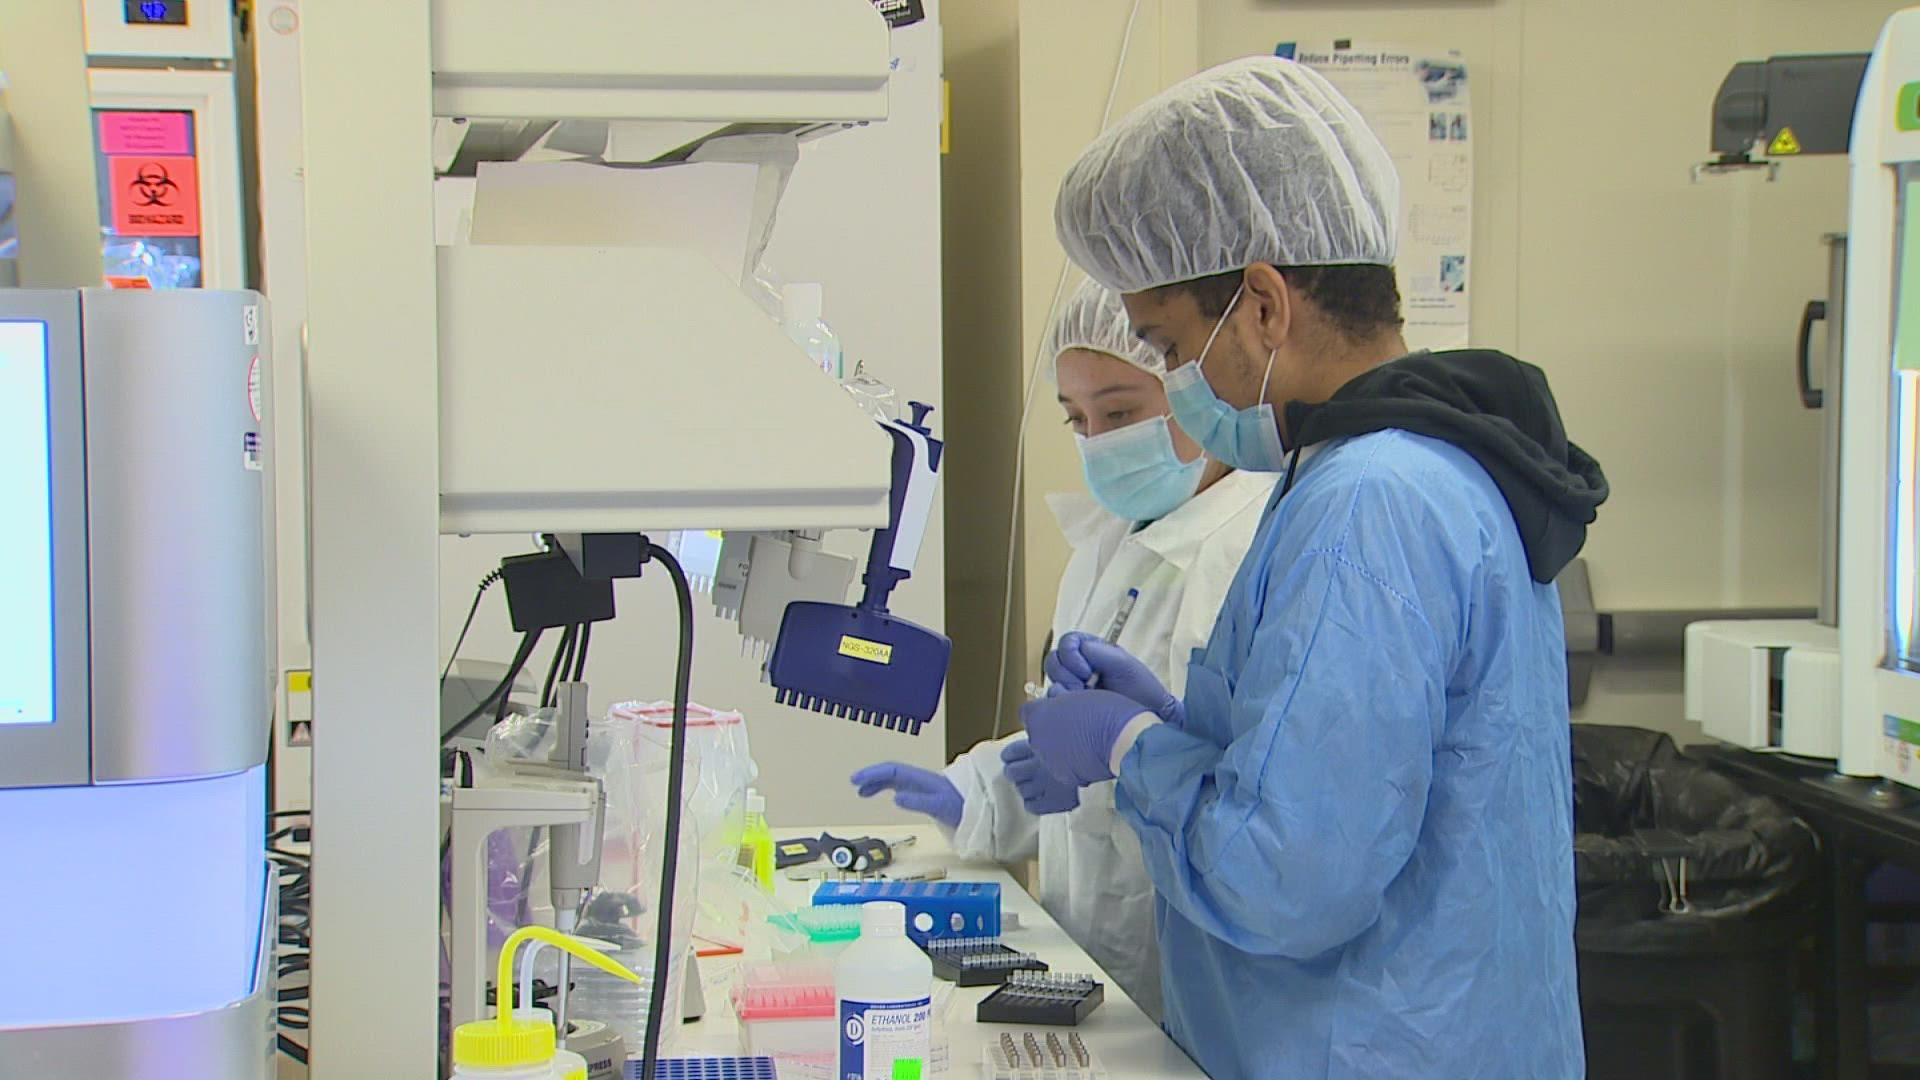 King County could see 2,000 new daily COVID-19 cases within a week, according to projections from the University of Washington Virology lab.